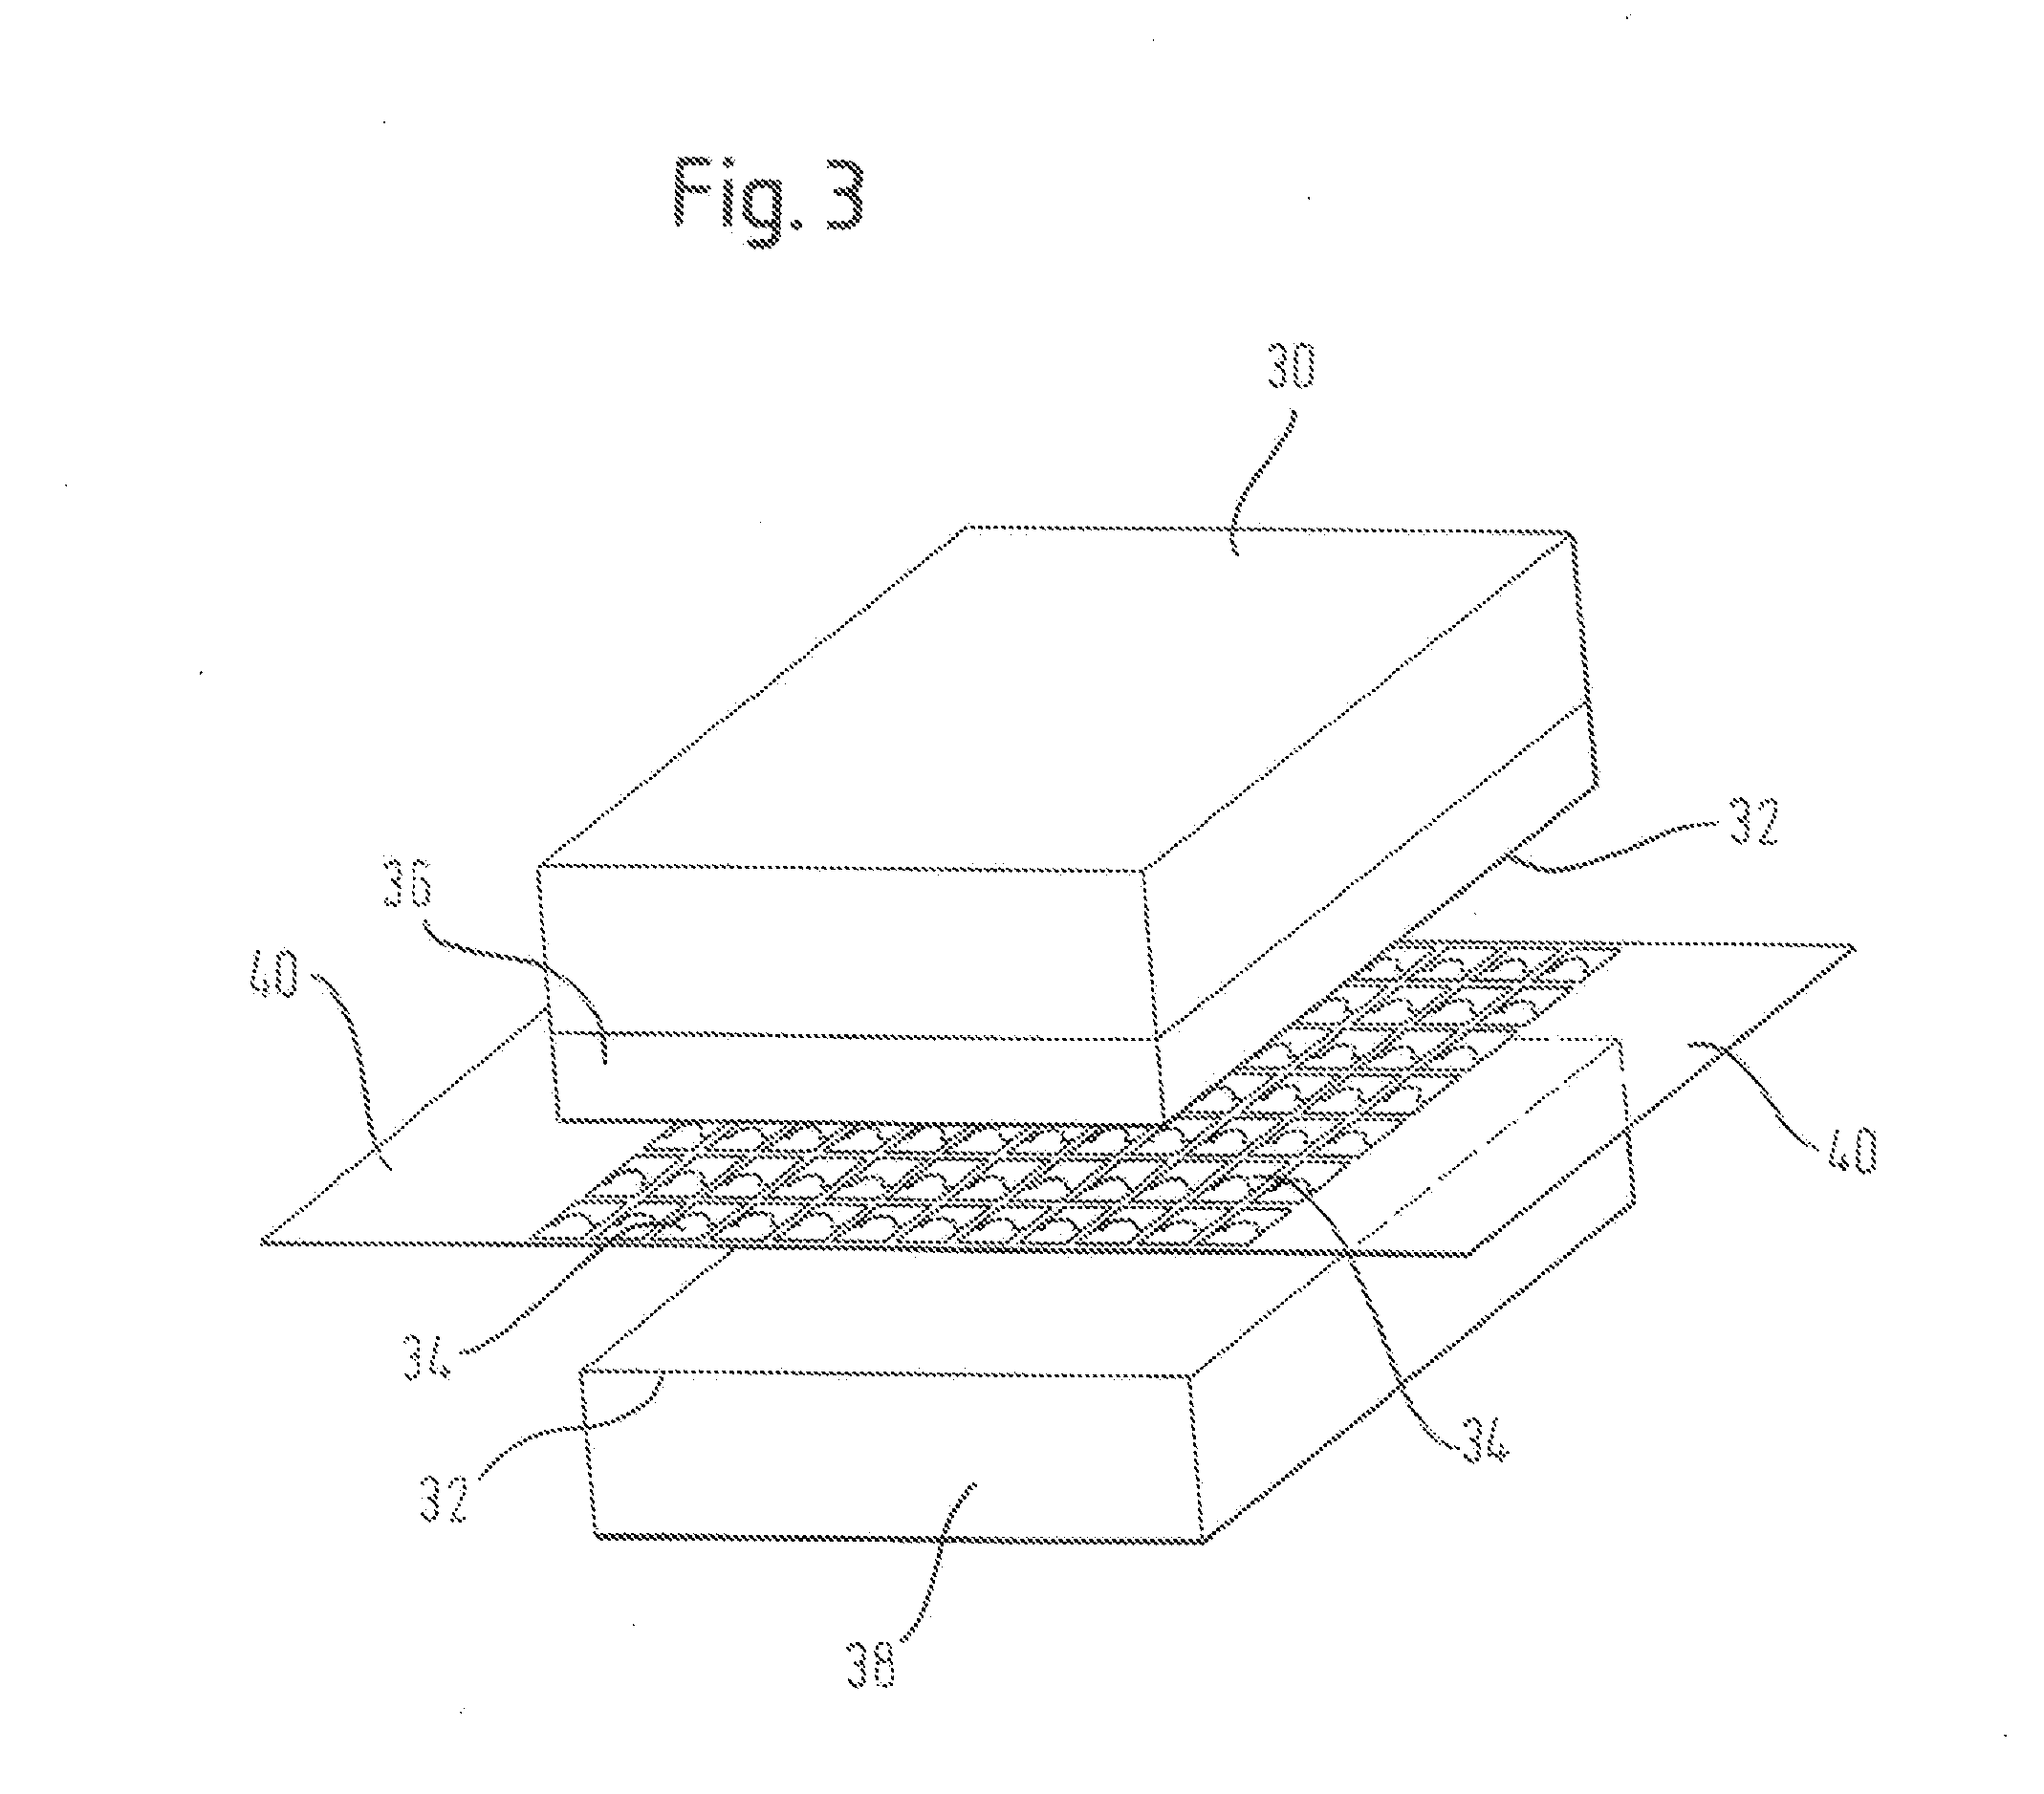 Electronic Device, a Chip Contacting Method and a Contacting Device